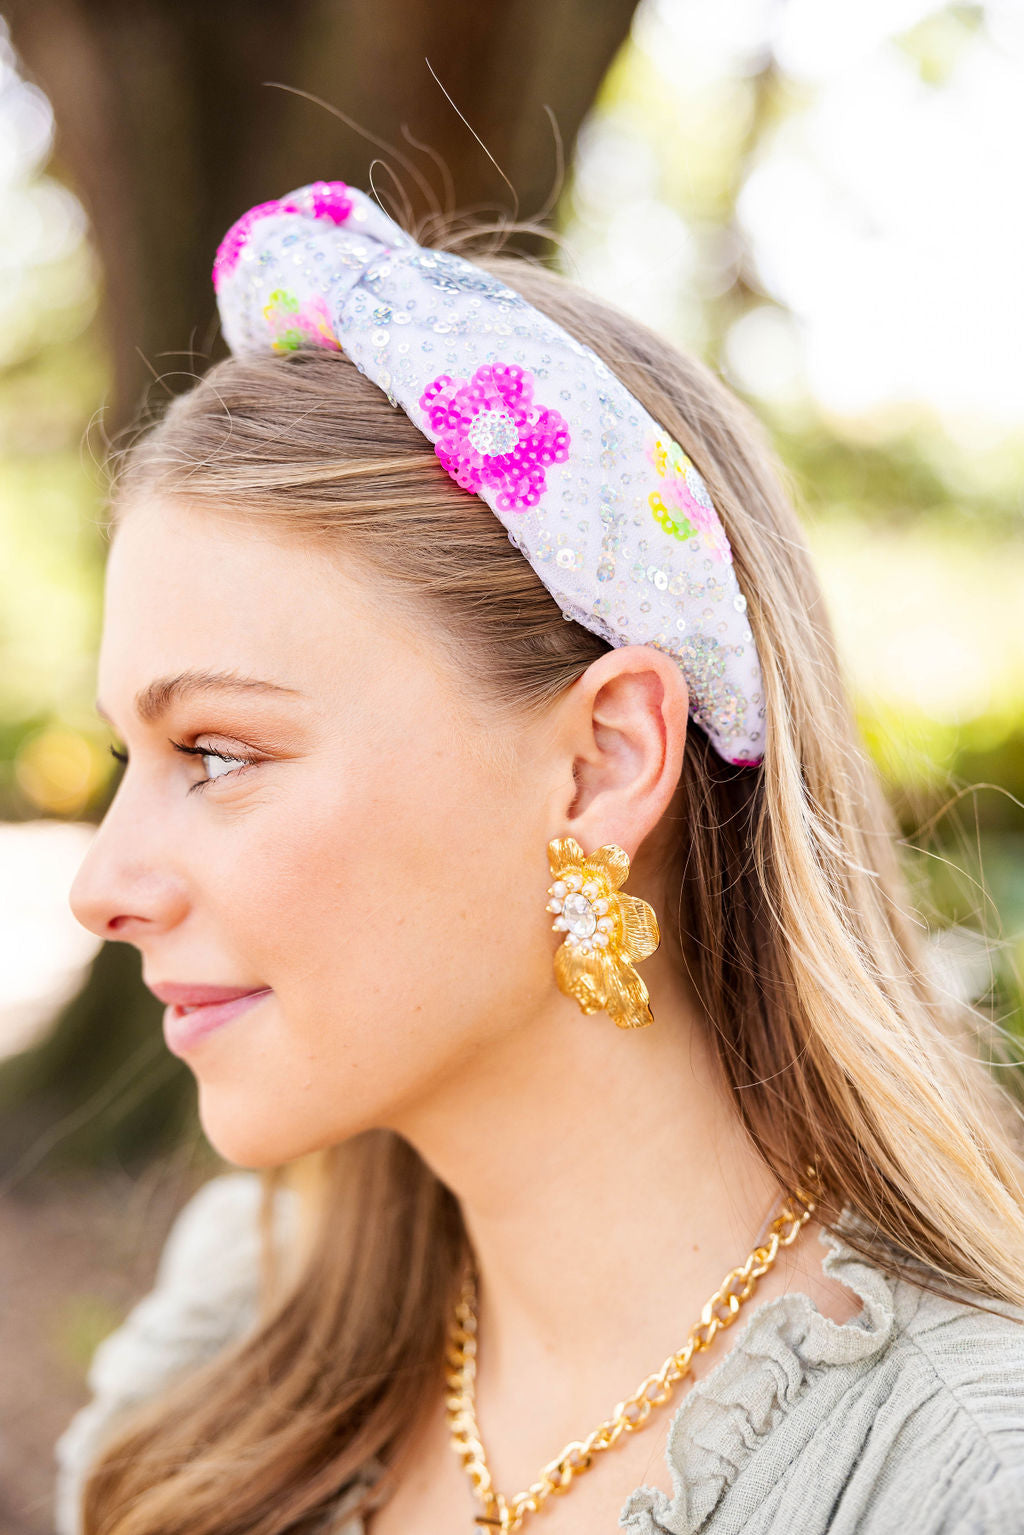 Adult Size Sequin Headband with Bright Flowers